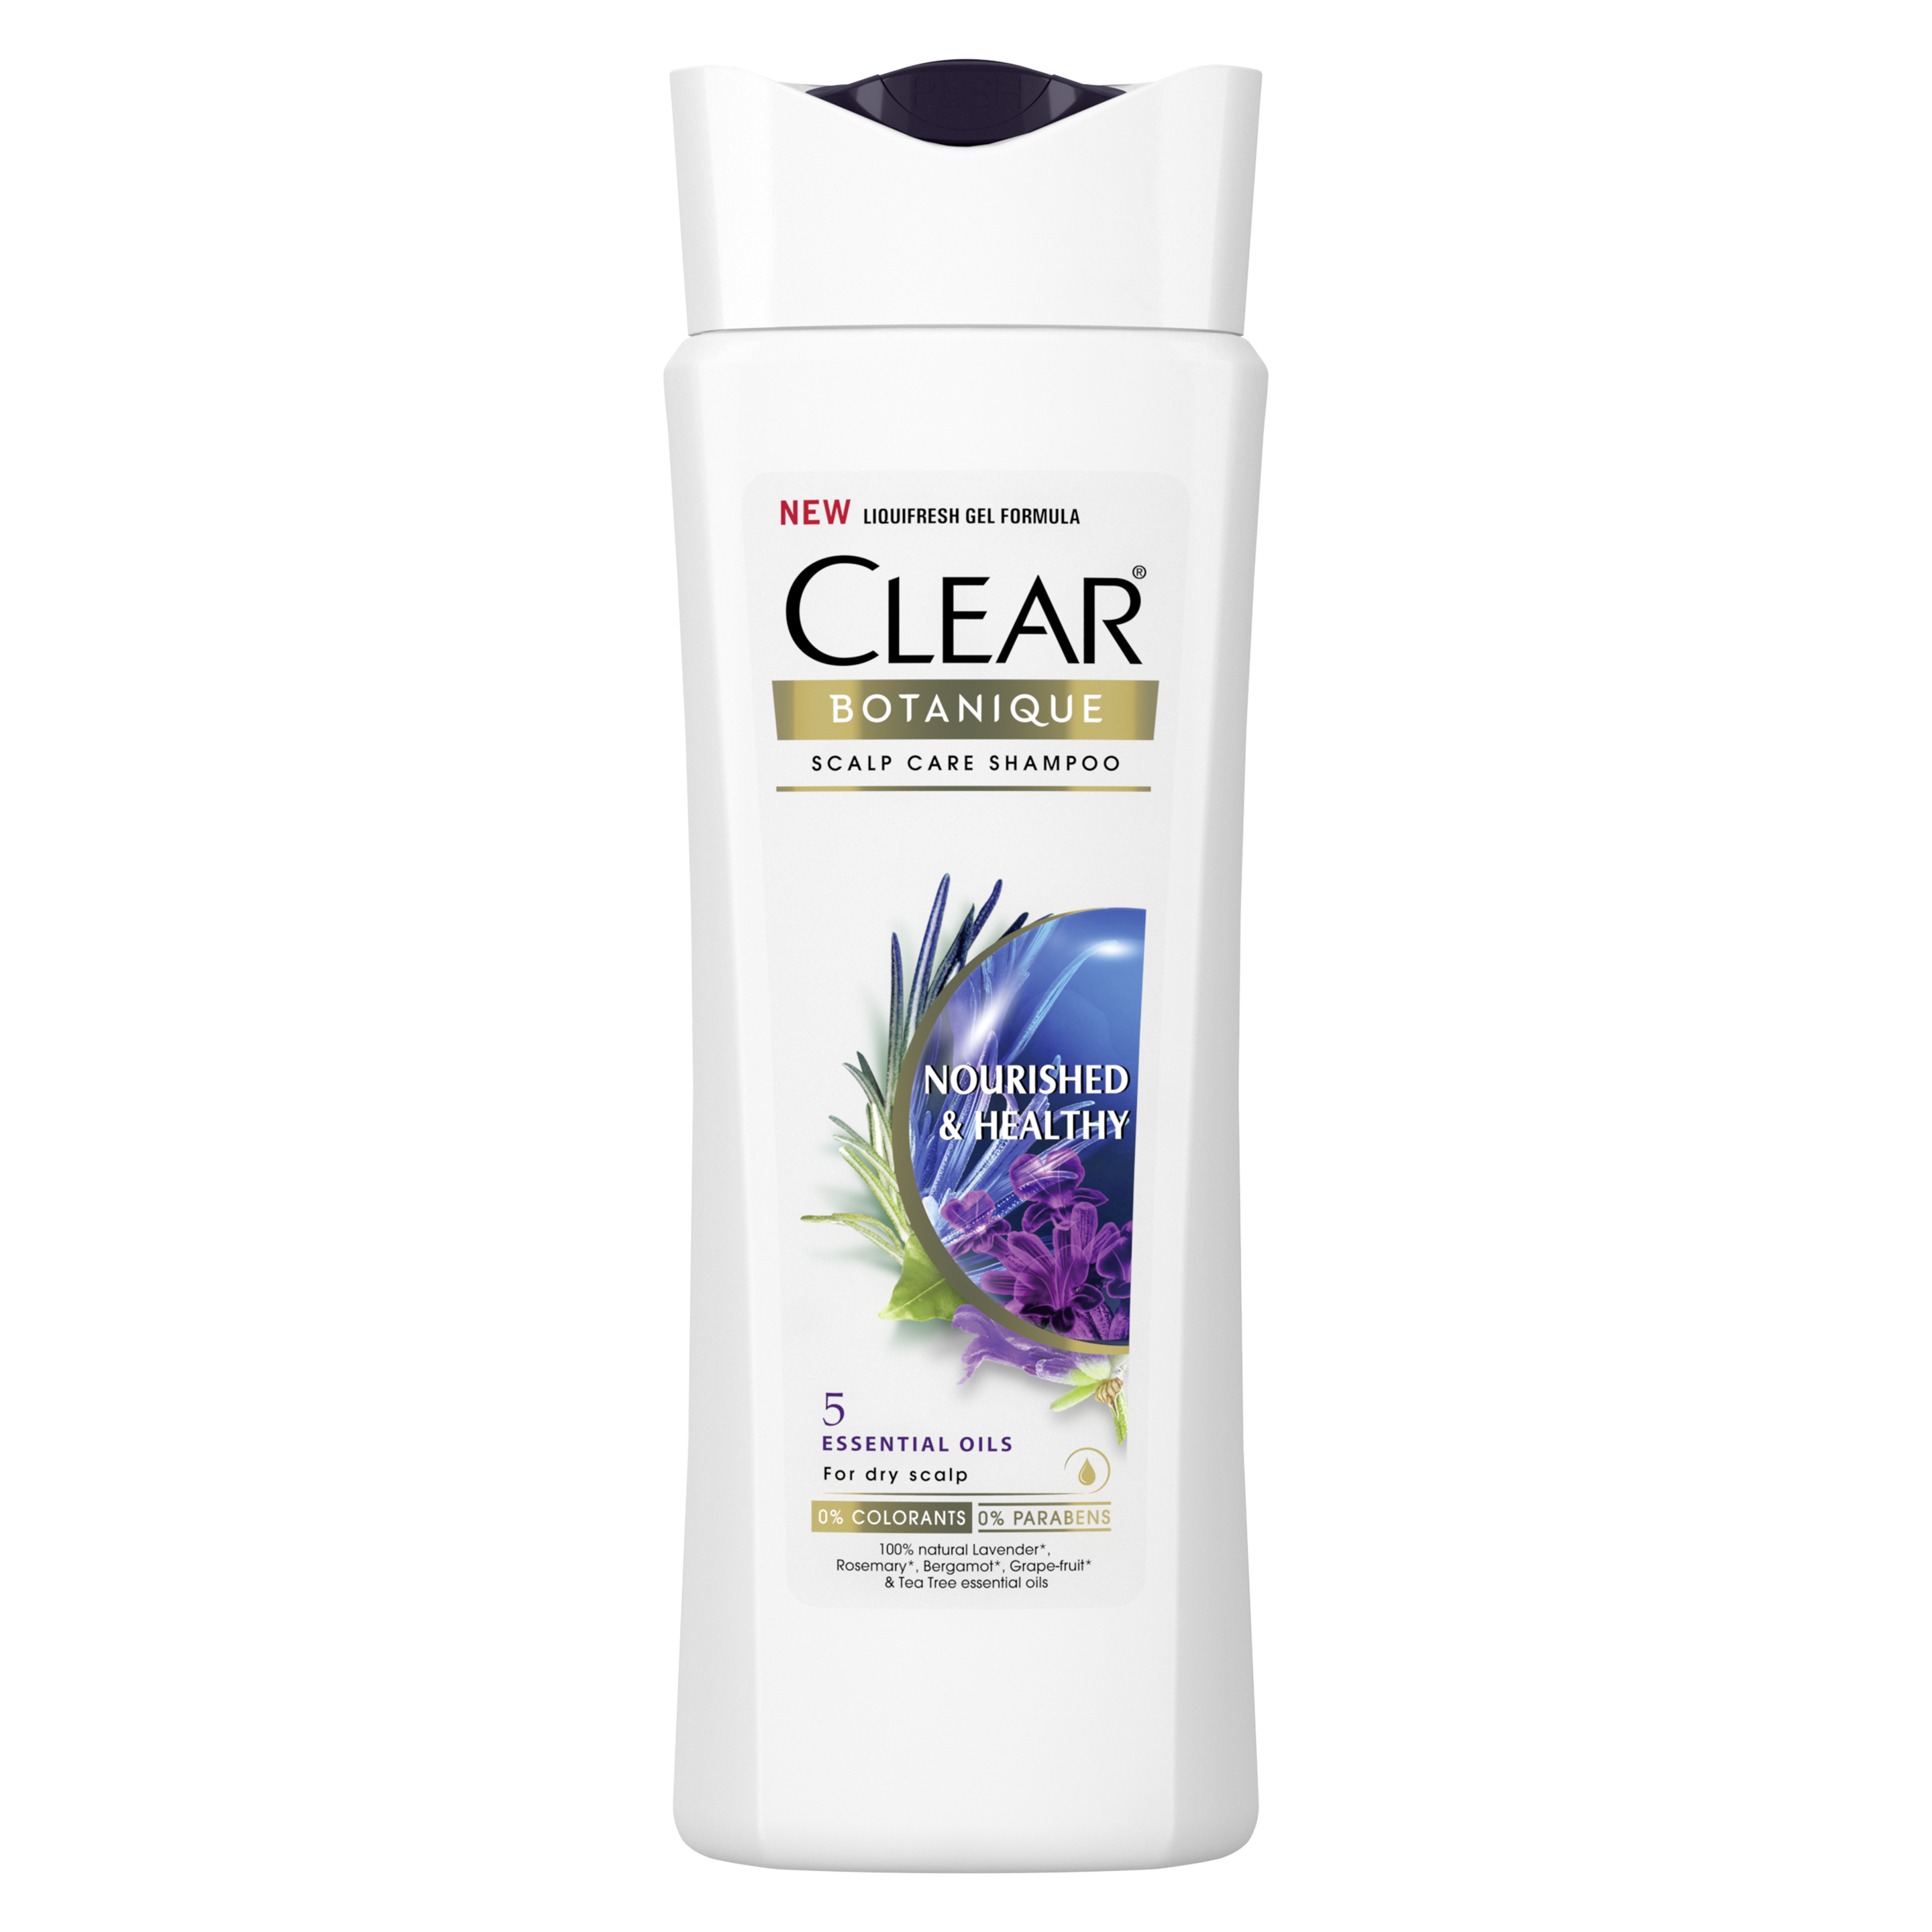 CLEAR Botanique Nourished and Healthy Natural Anti dandruff Shampoo Text